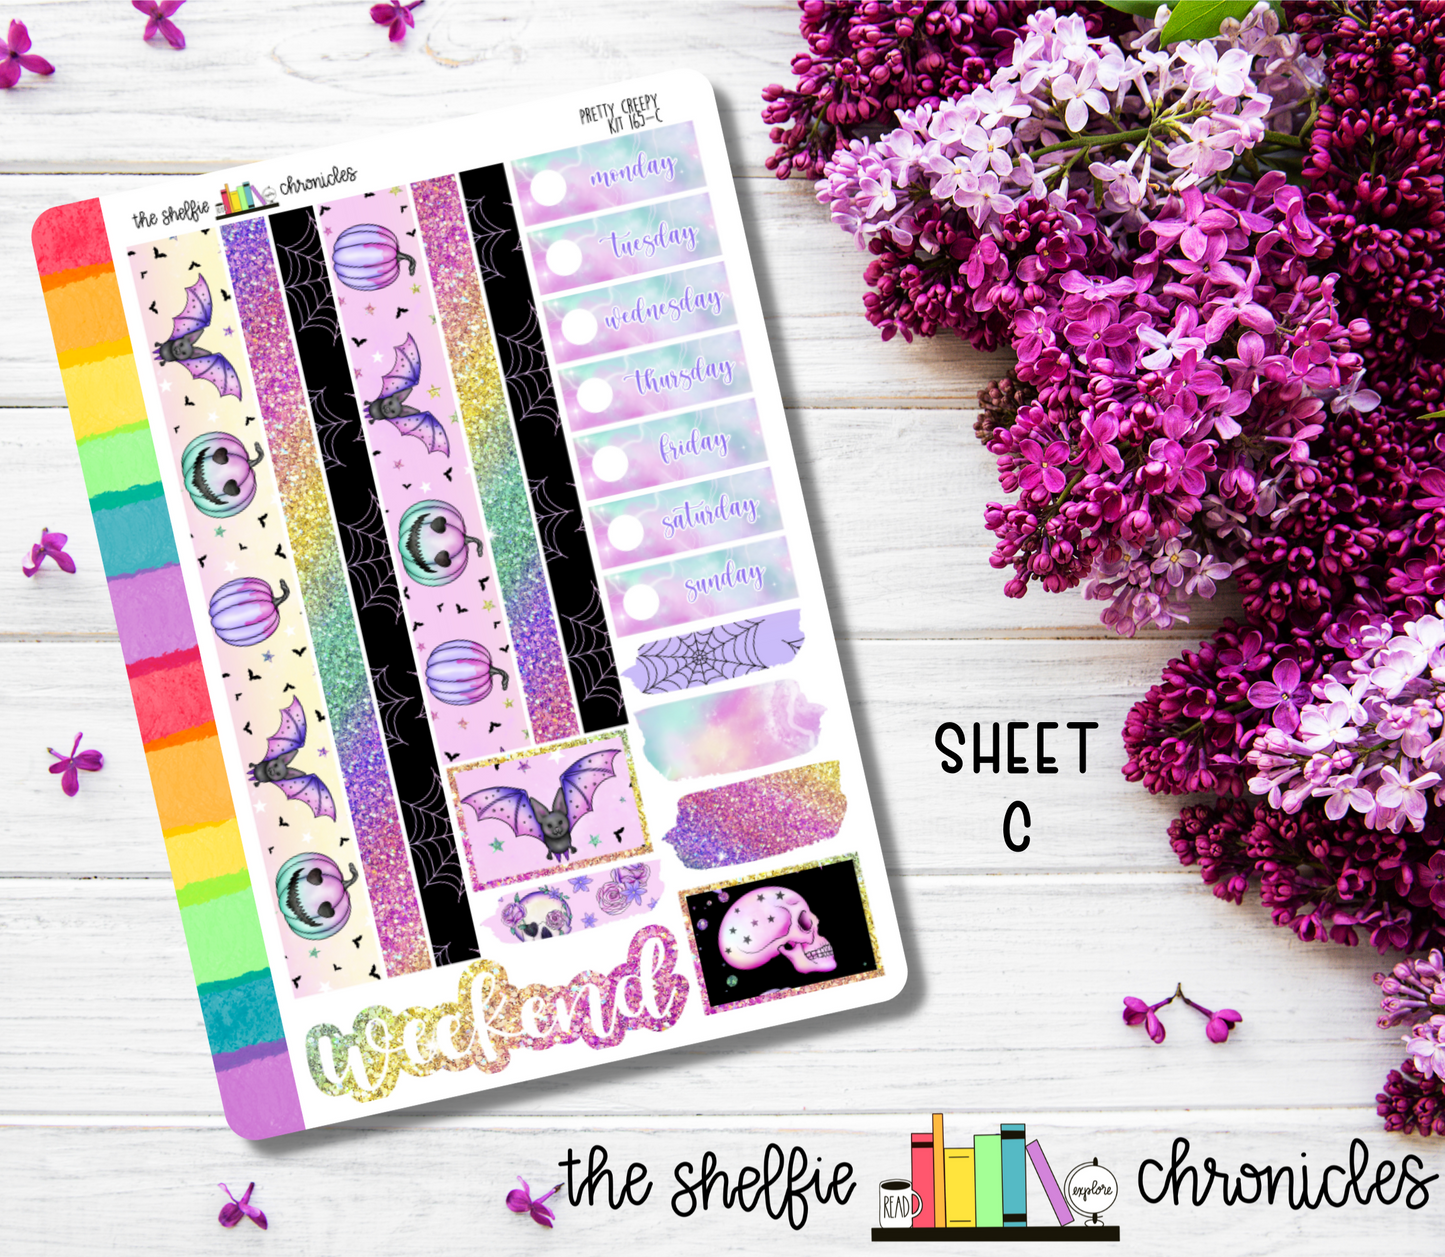 Kit 165 - Pretty Creepy Weekly Kit - Die Cut Stickers - Repositionable Paper - Made To Fit 7x9 Planners